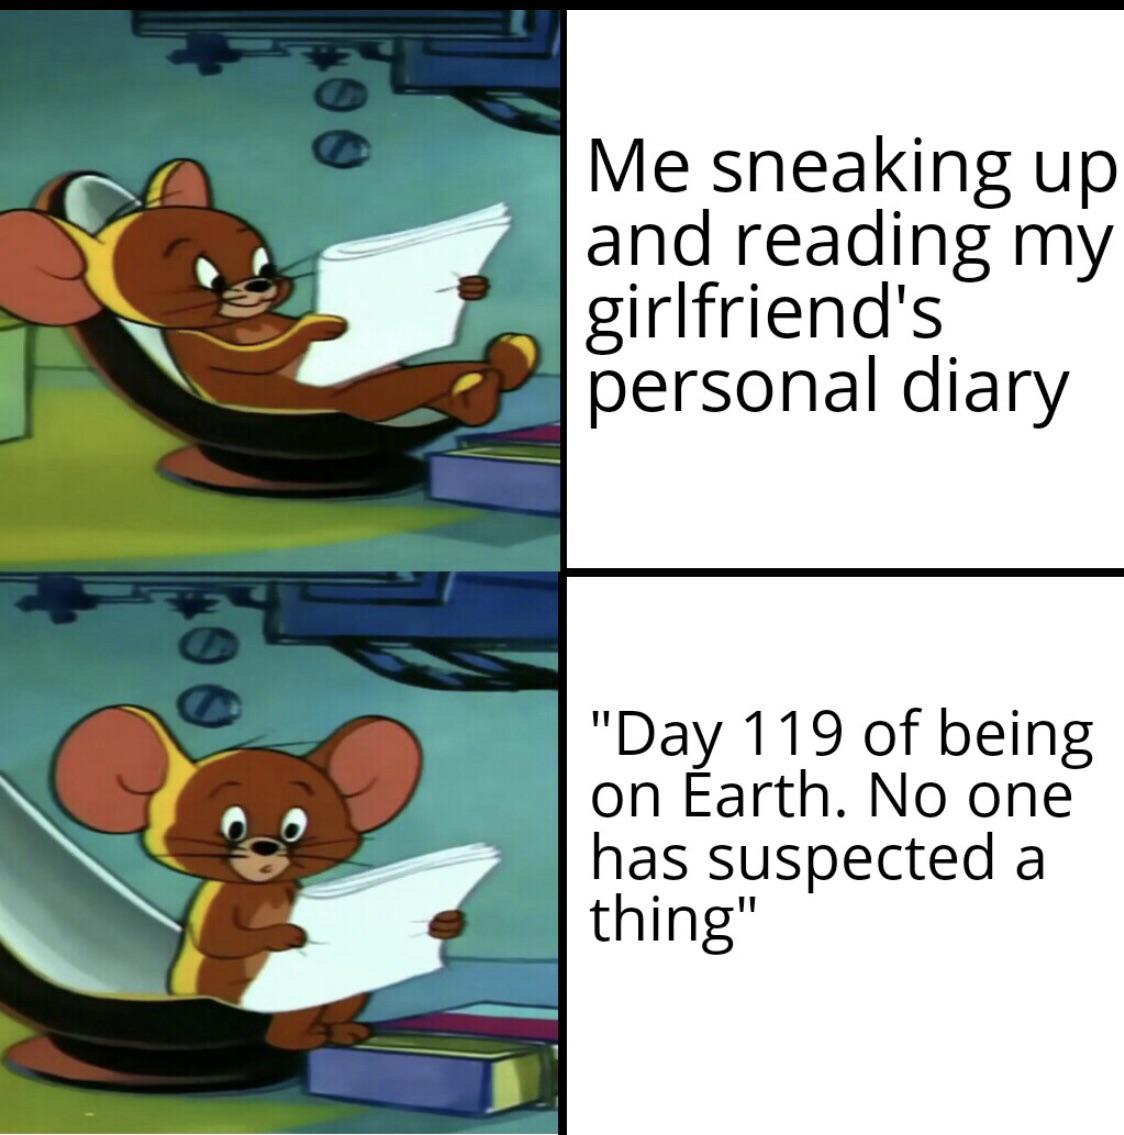 funny and dank memes  - Me sneaking up and reading my girlfriend's personal diary "Day 119 of being on Earth. No one has suspected a thing"